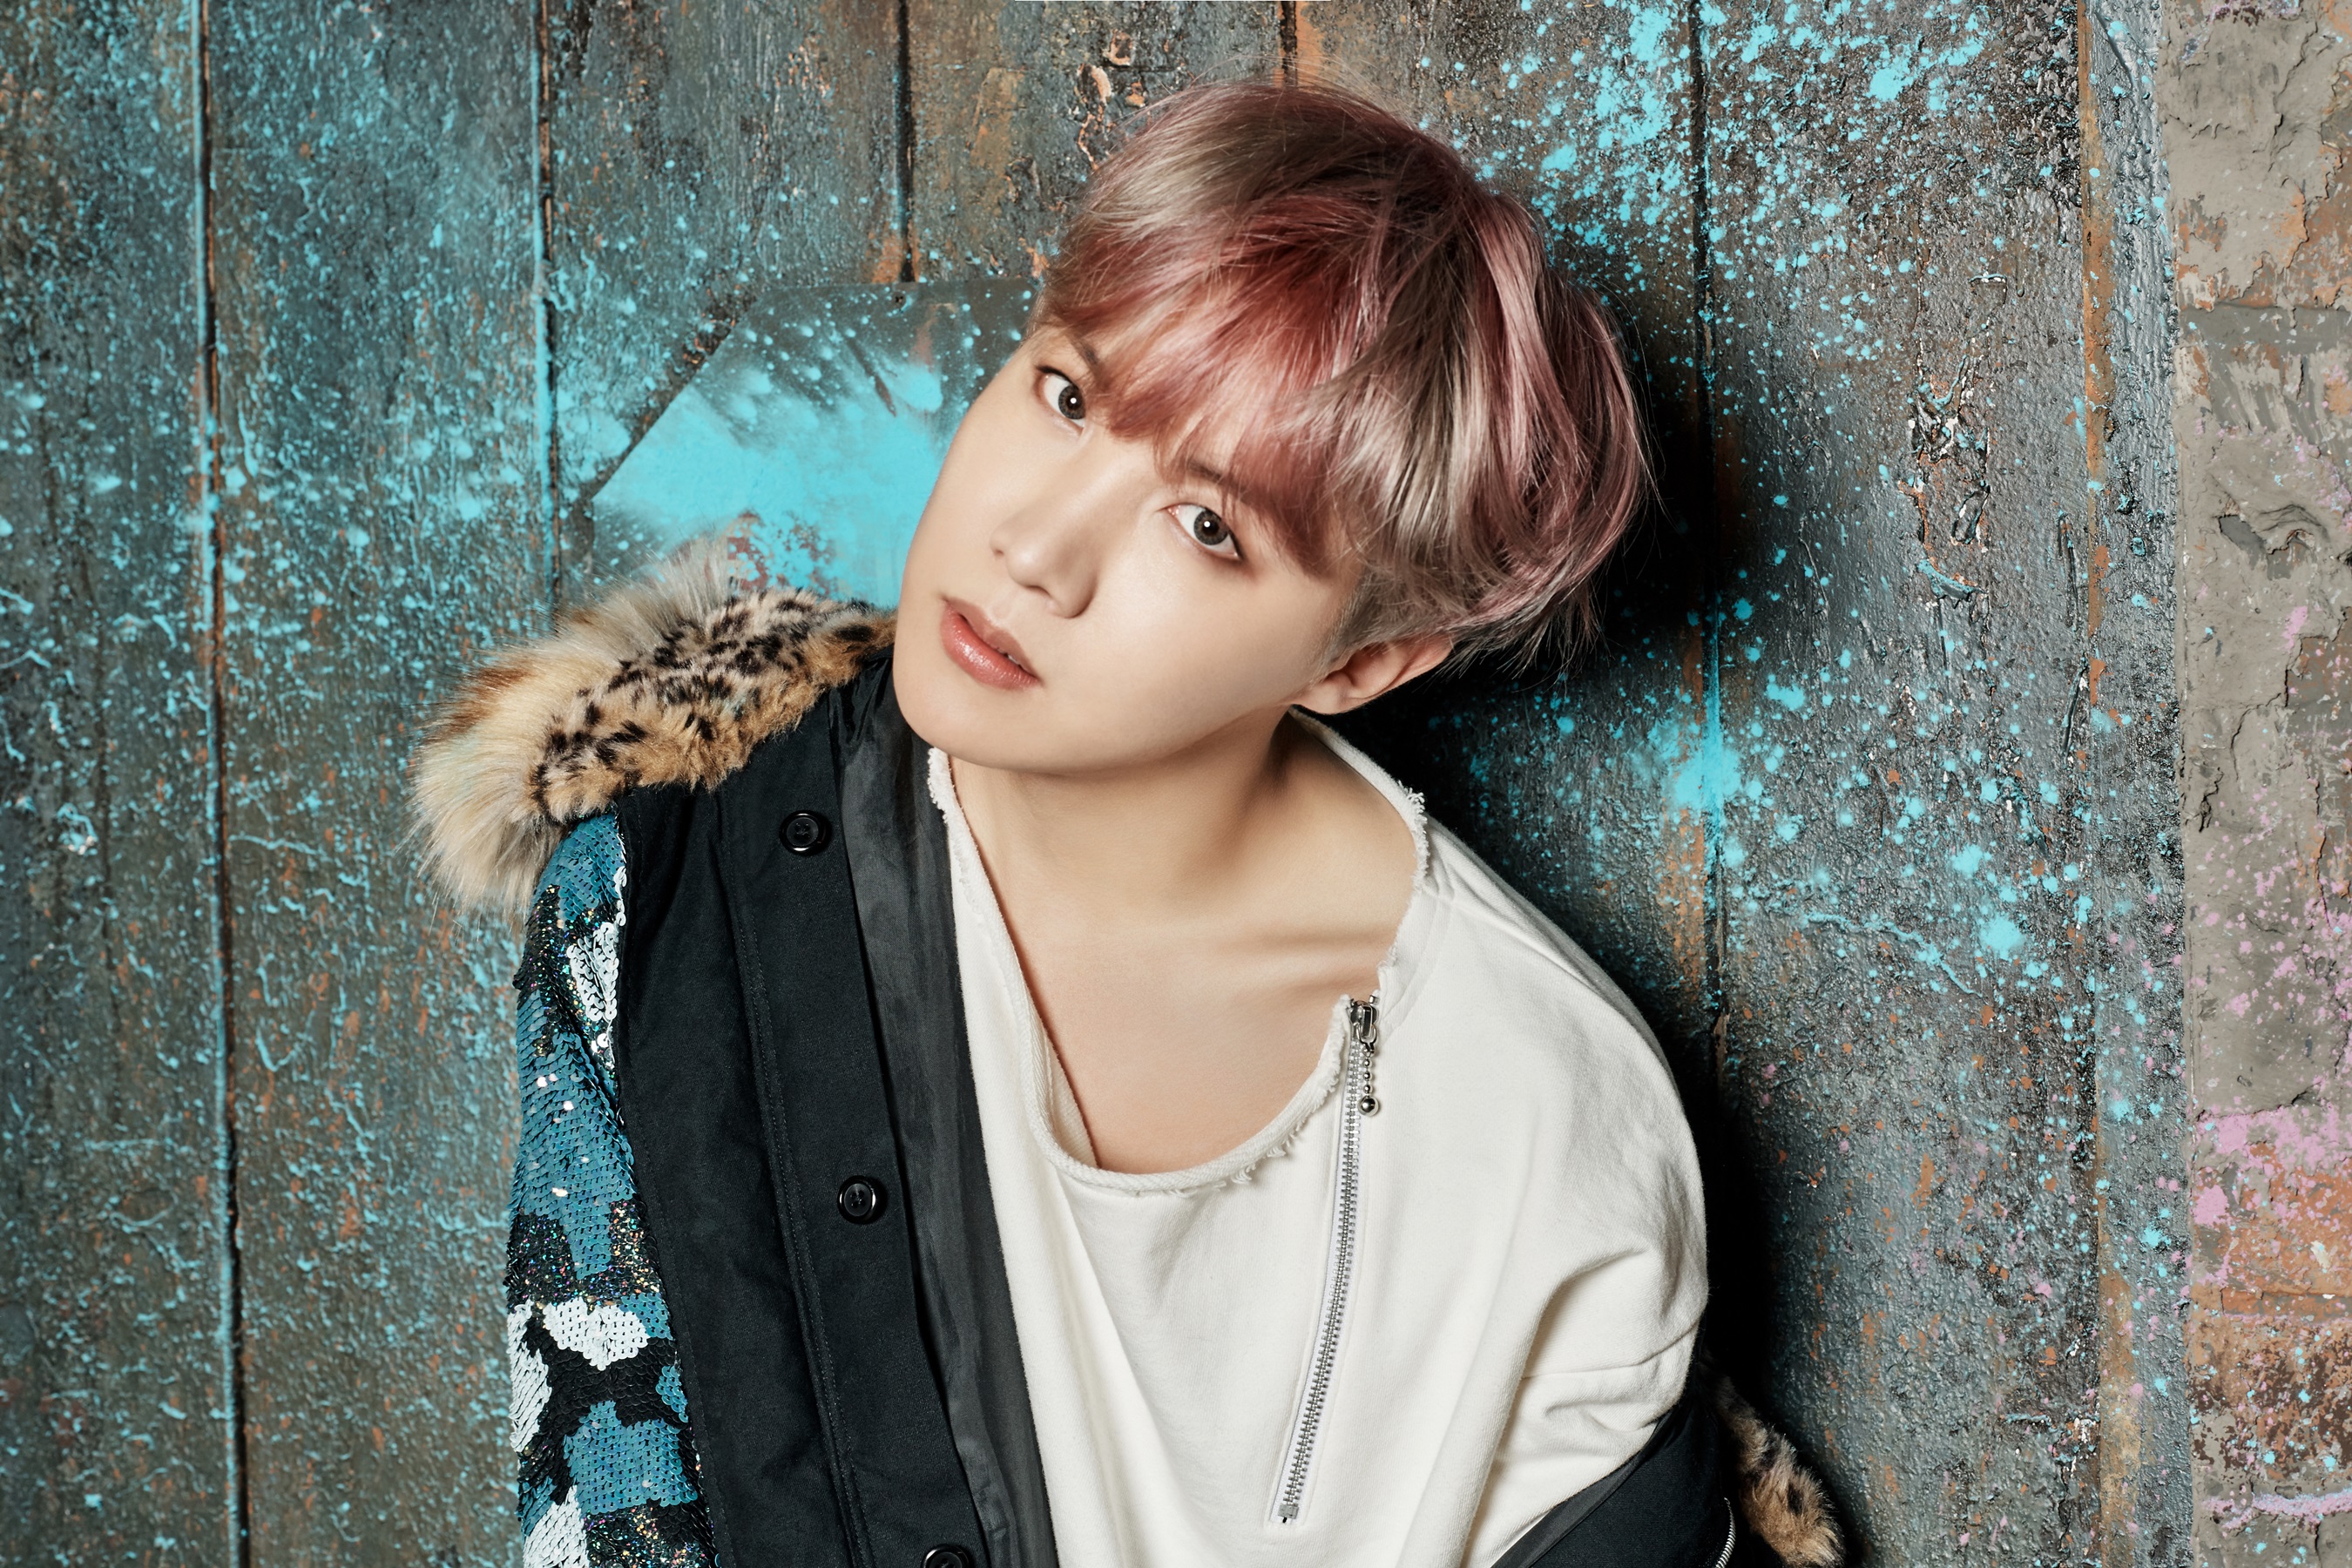 BTS J-Hope Profile, Age, Girlfriend, Real Name, Background, Net